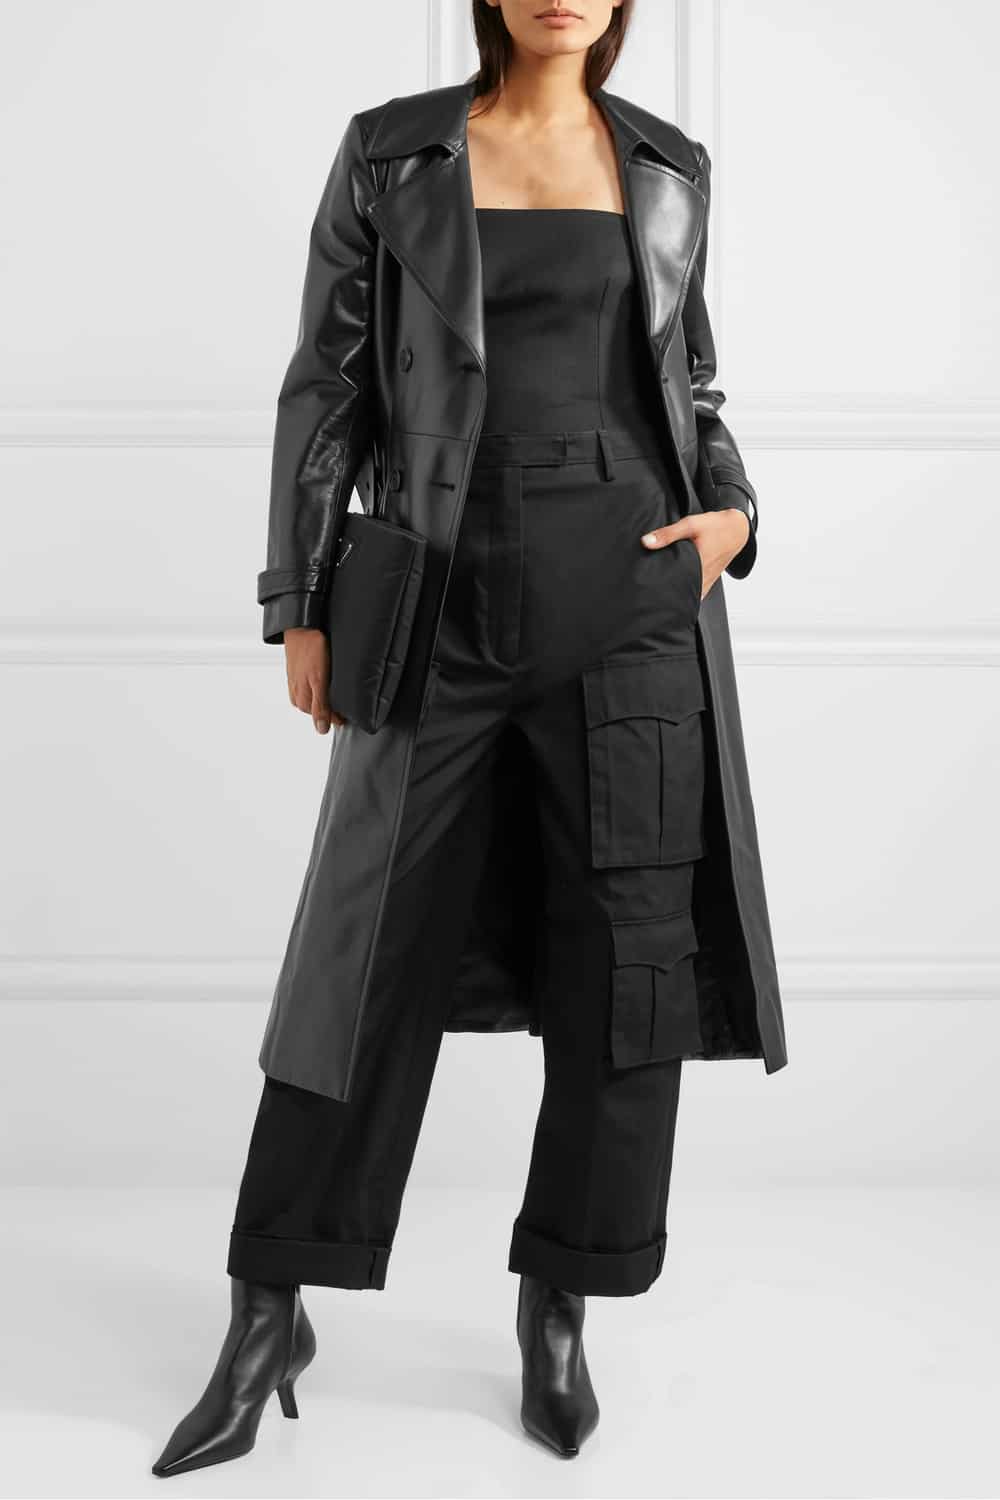 Prada Double-Breasted Leather Trench Coat